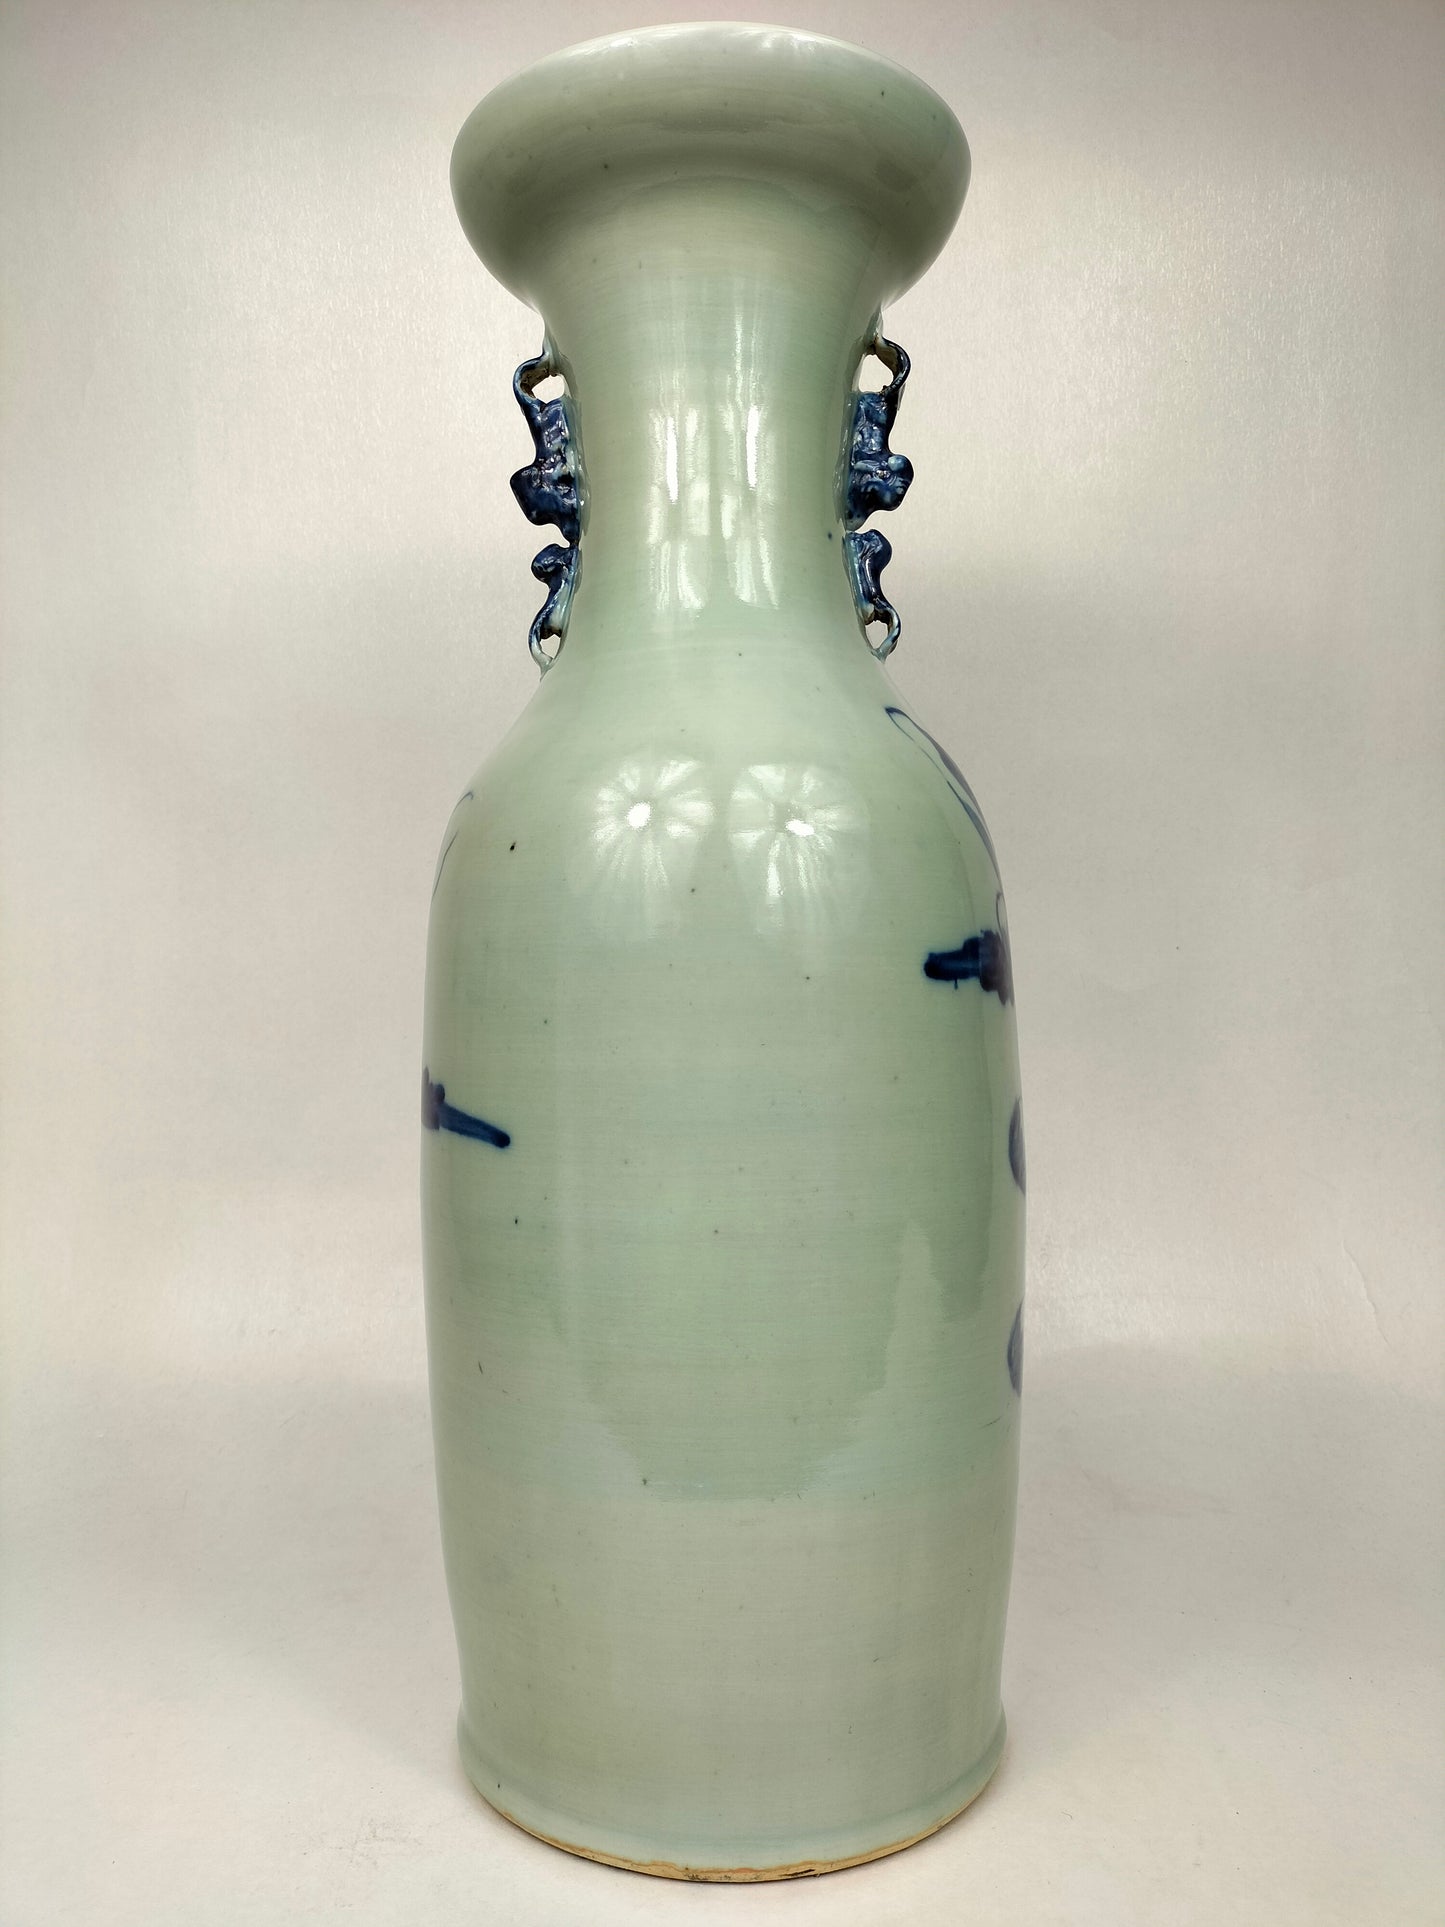 Large antique Chinese celadon vase decorated with sages // Qing Dynasty - 19th century